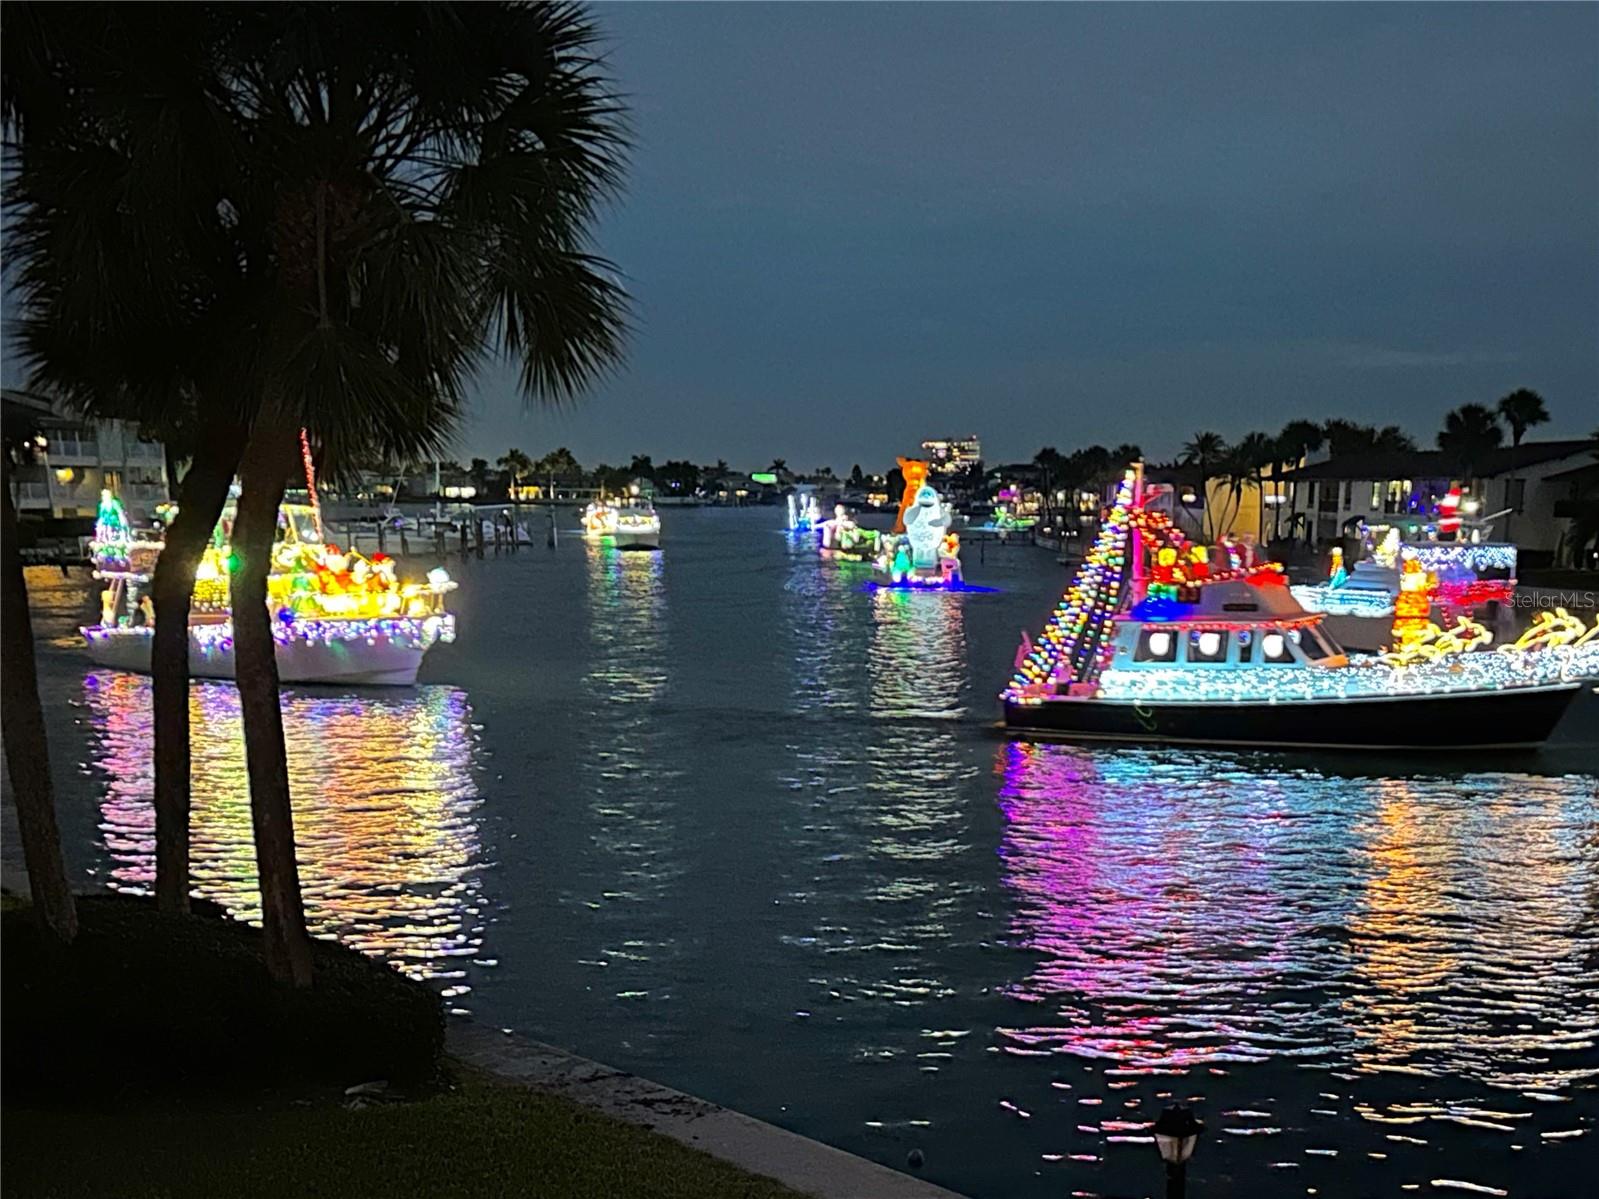 No admission required for the best seat to the Treasure Island annual boat parade